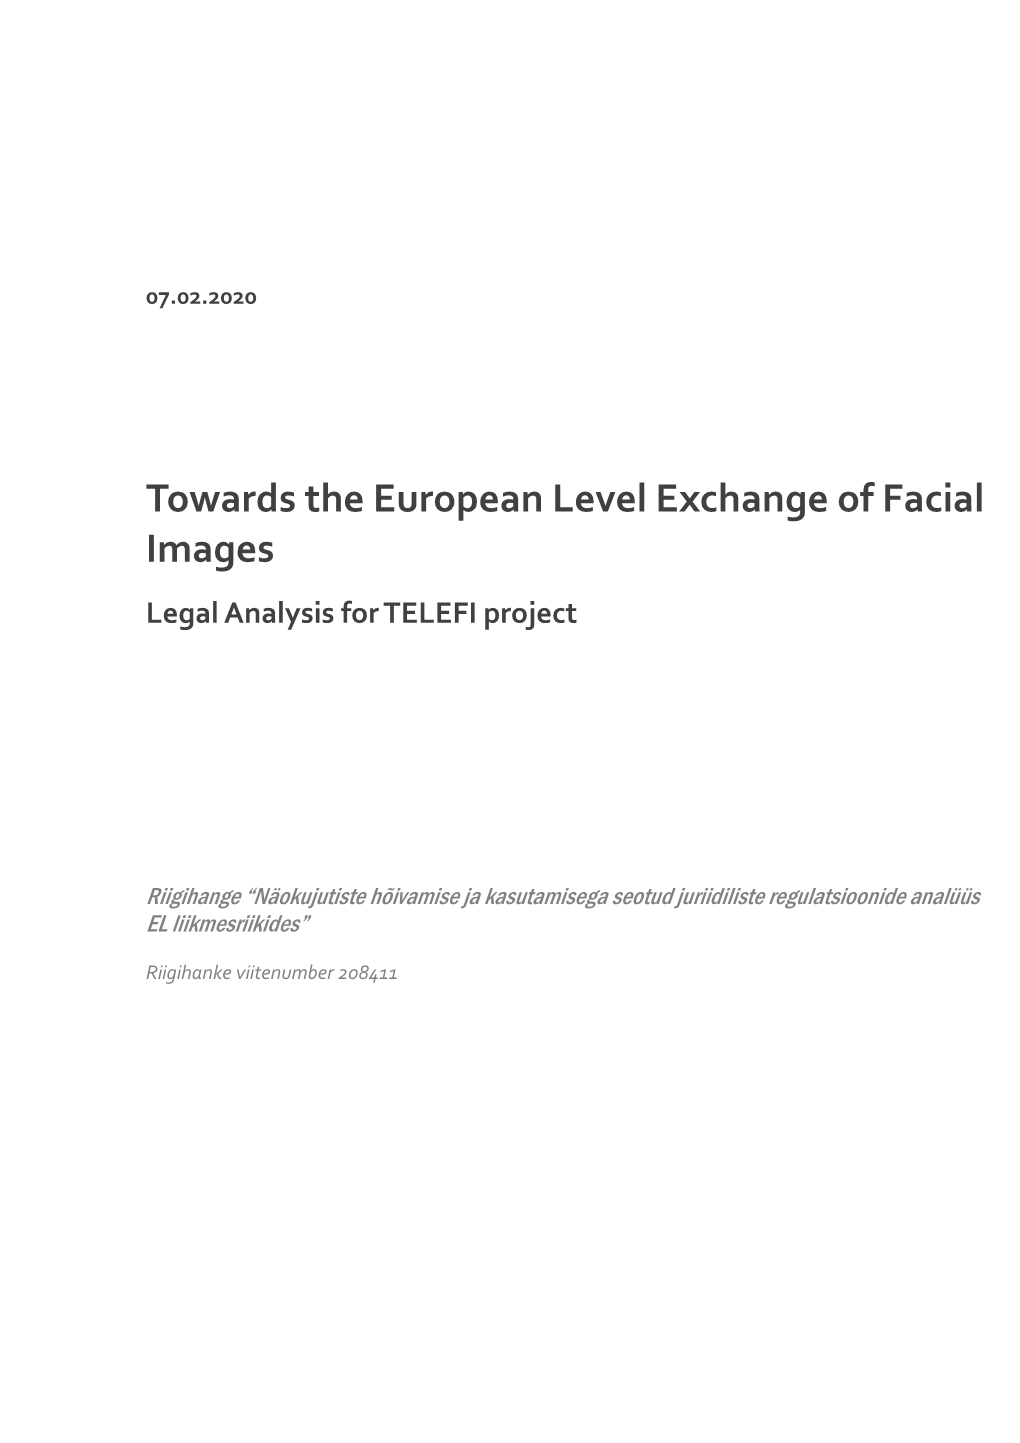 Towards the European Level Exchange of Facial Images